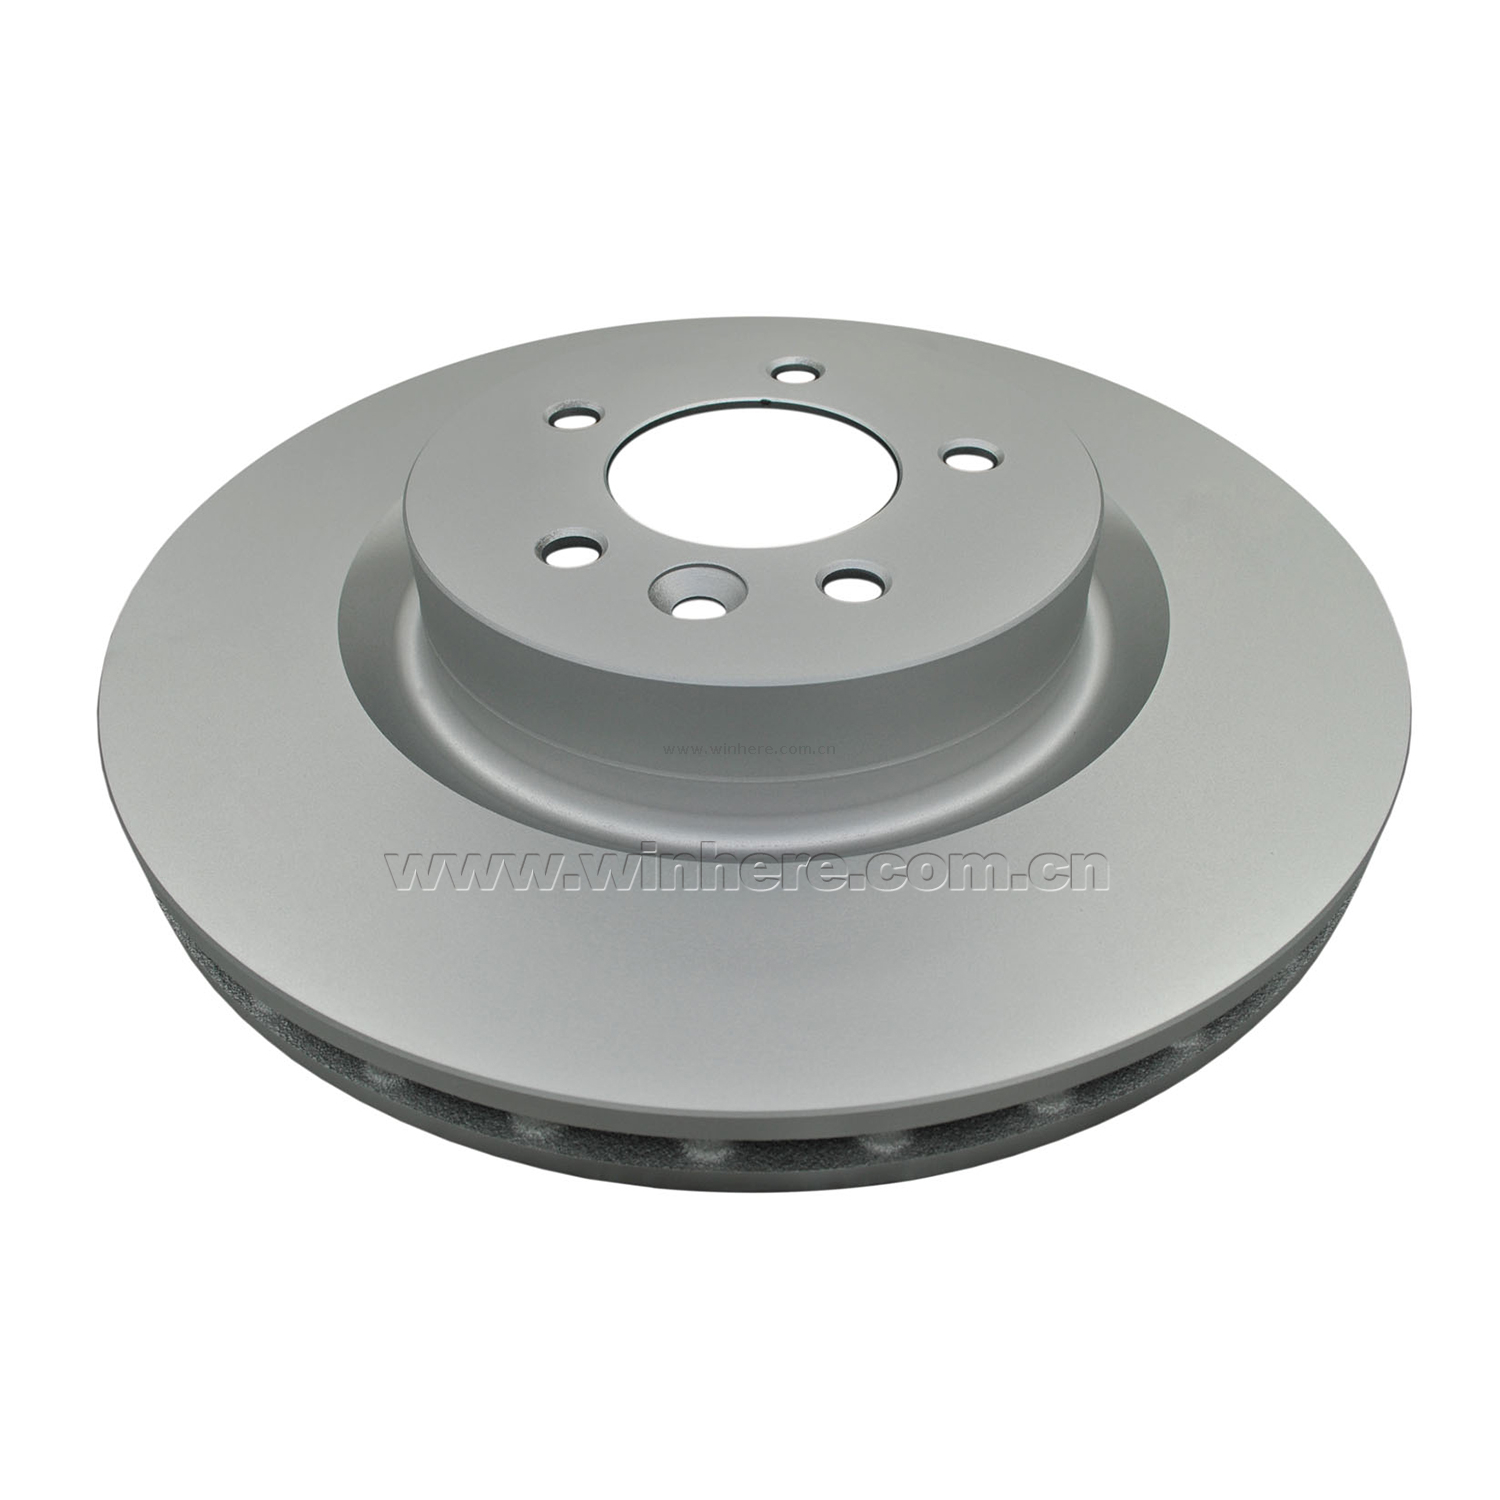 Brake Disc for LAND ROVER Front ECE R90 from China manufacturer - Winhere